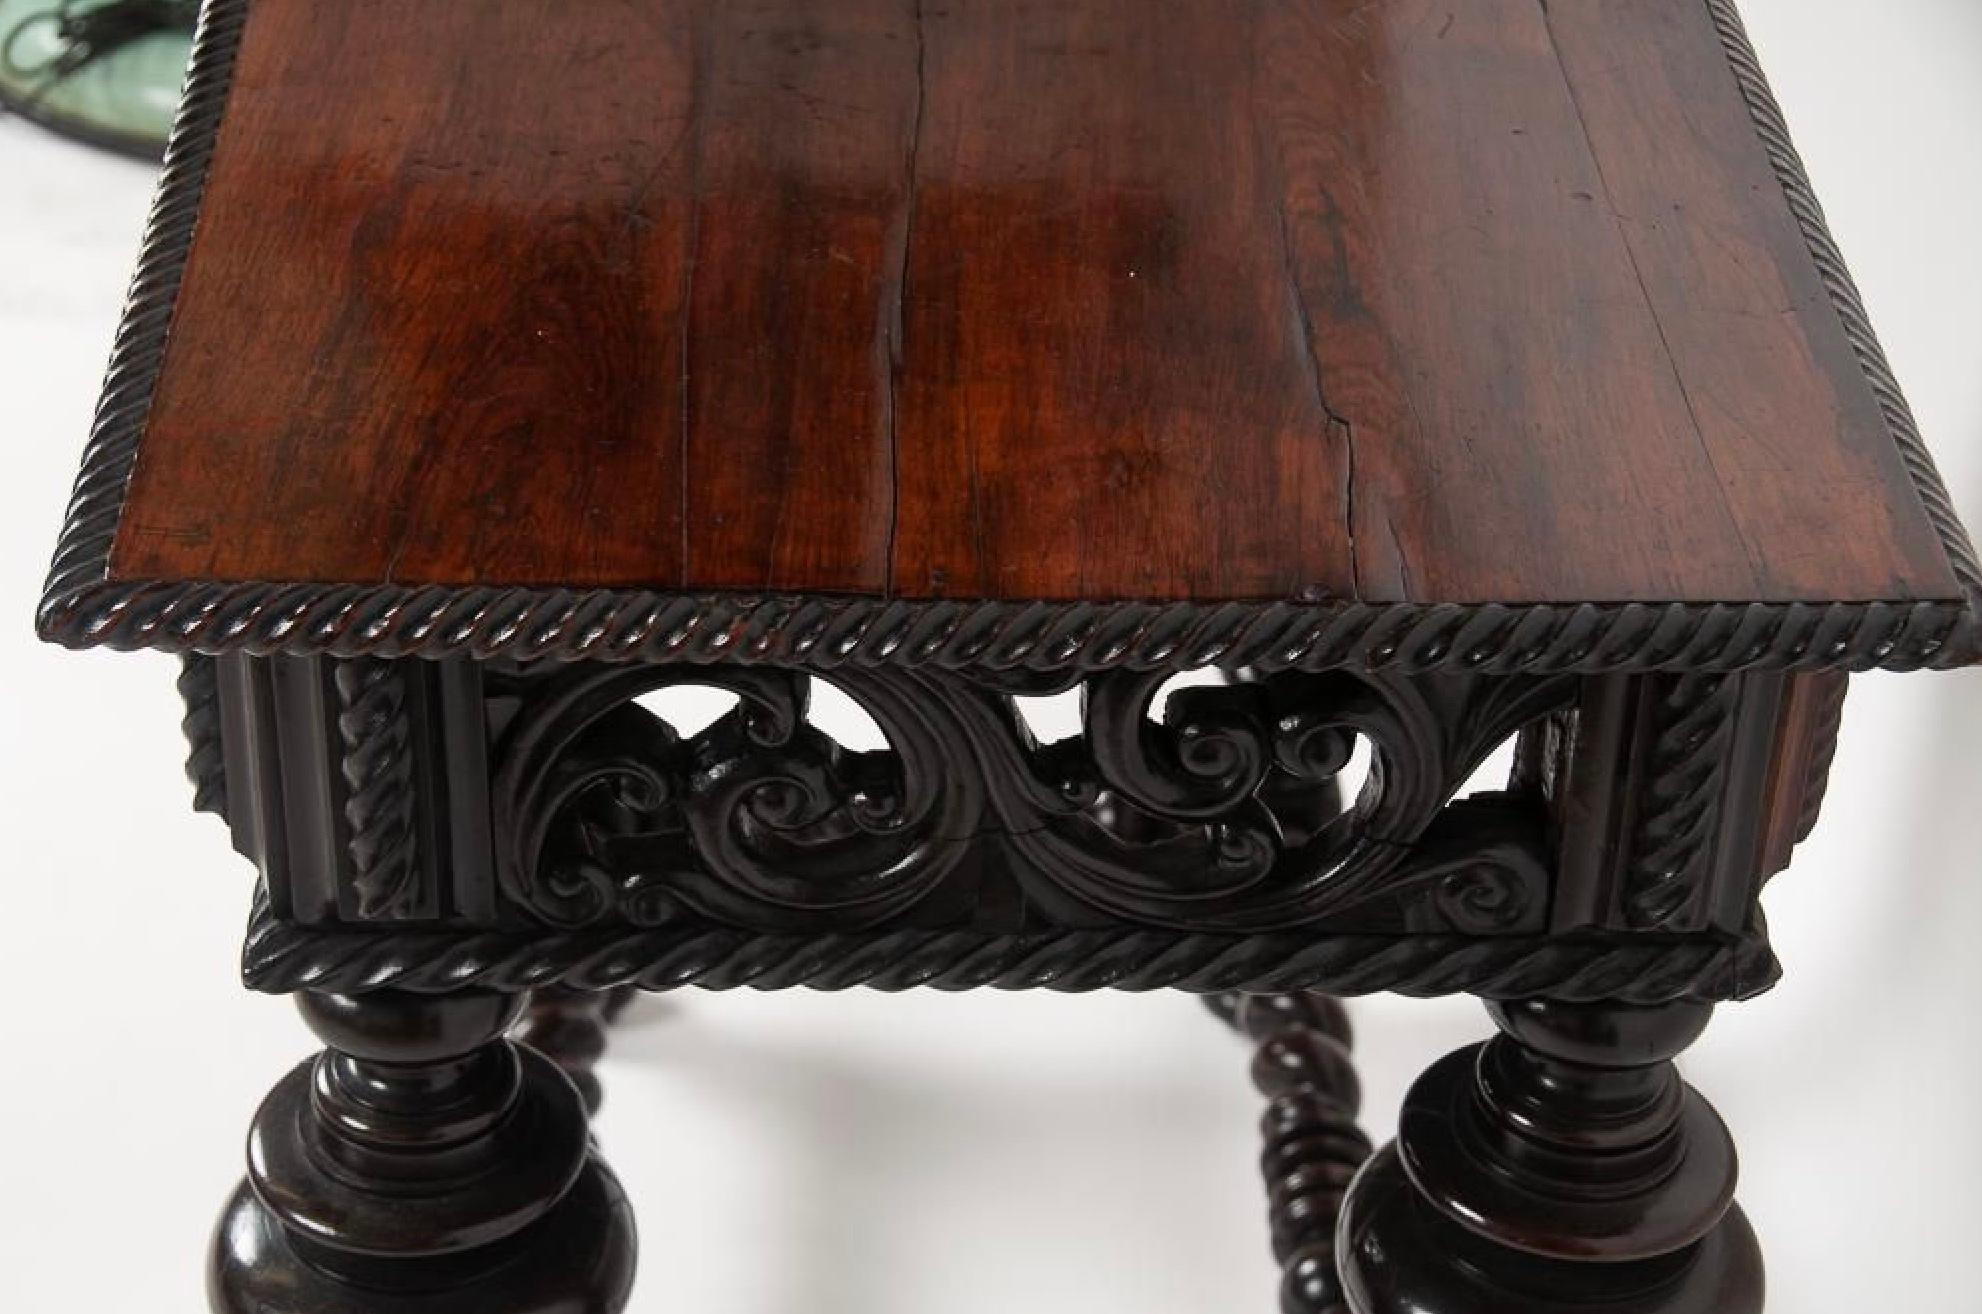 Antique Portuguese Carved Rosewood Side Table With Bulbous Turnings Early 19th C For Sale 5